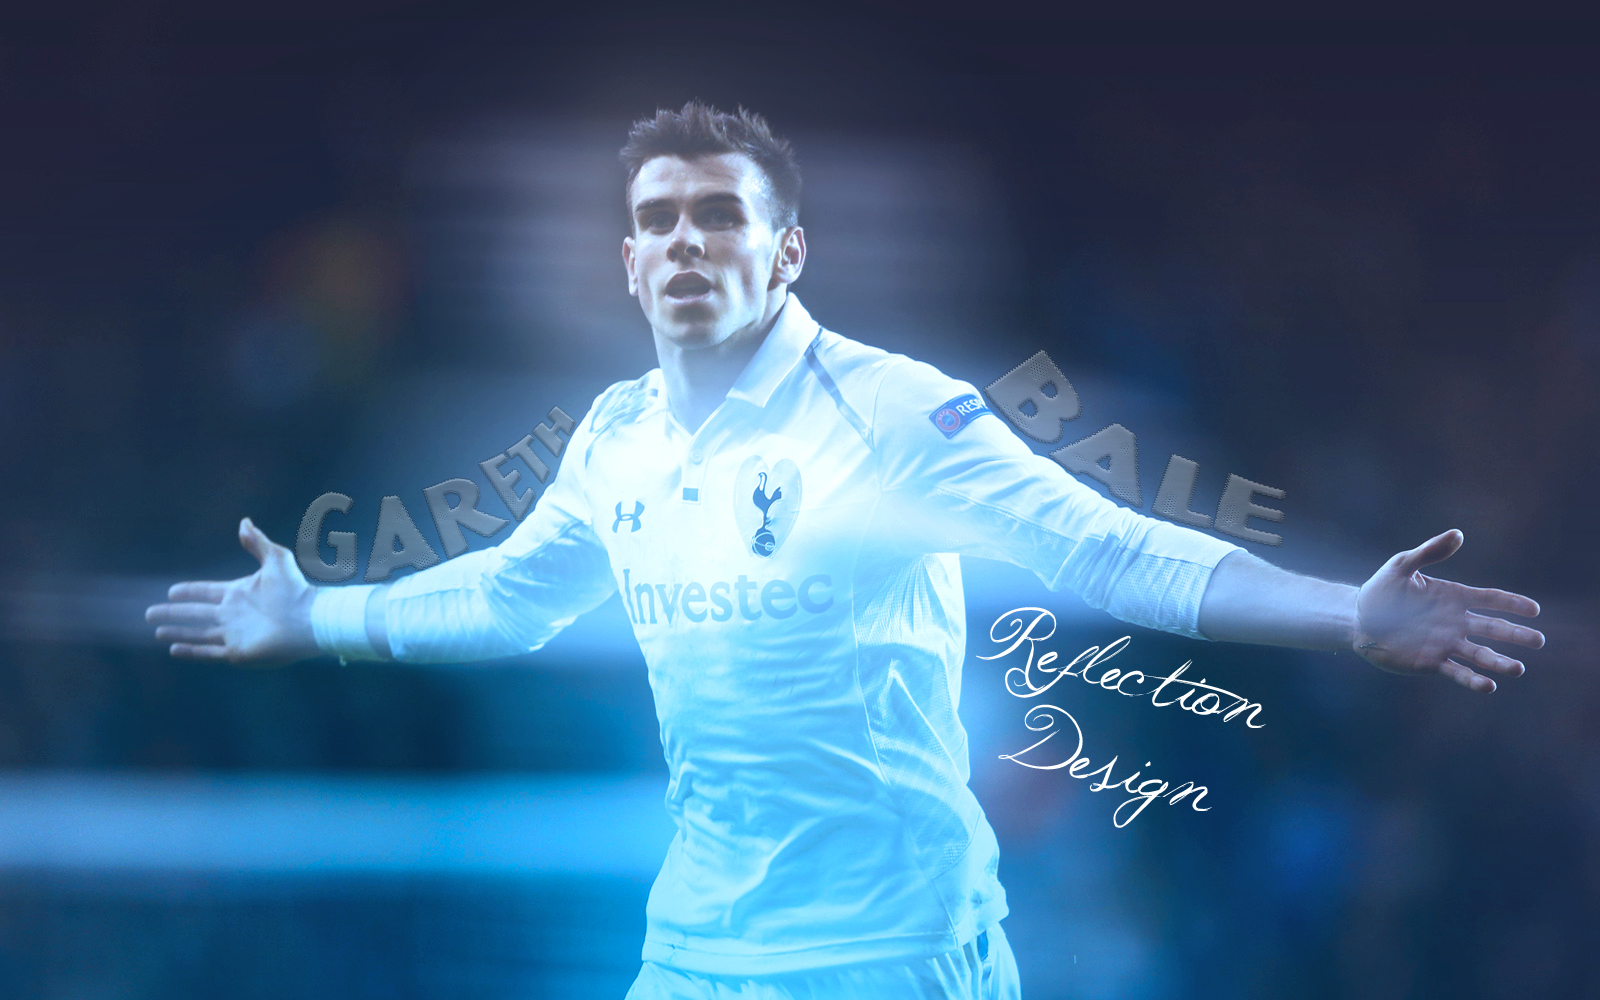 Gareth Bale Wallpaper Work By Reflectiongraphic